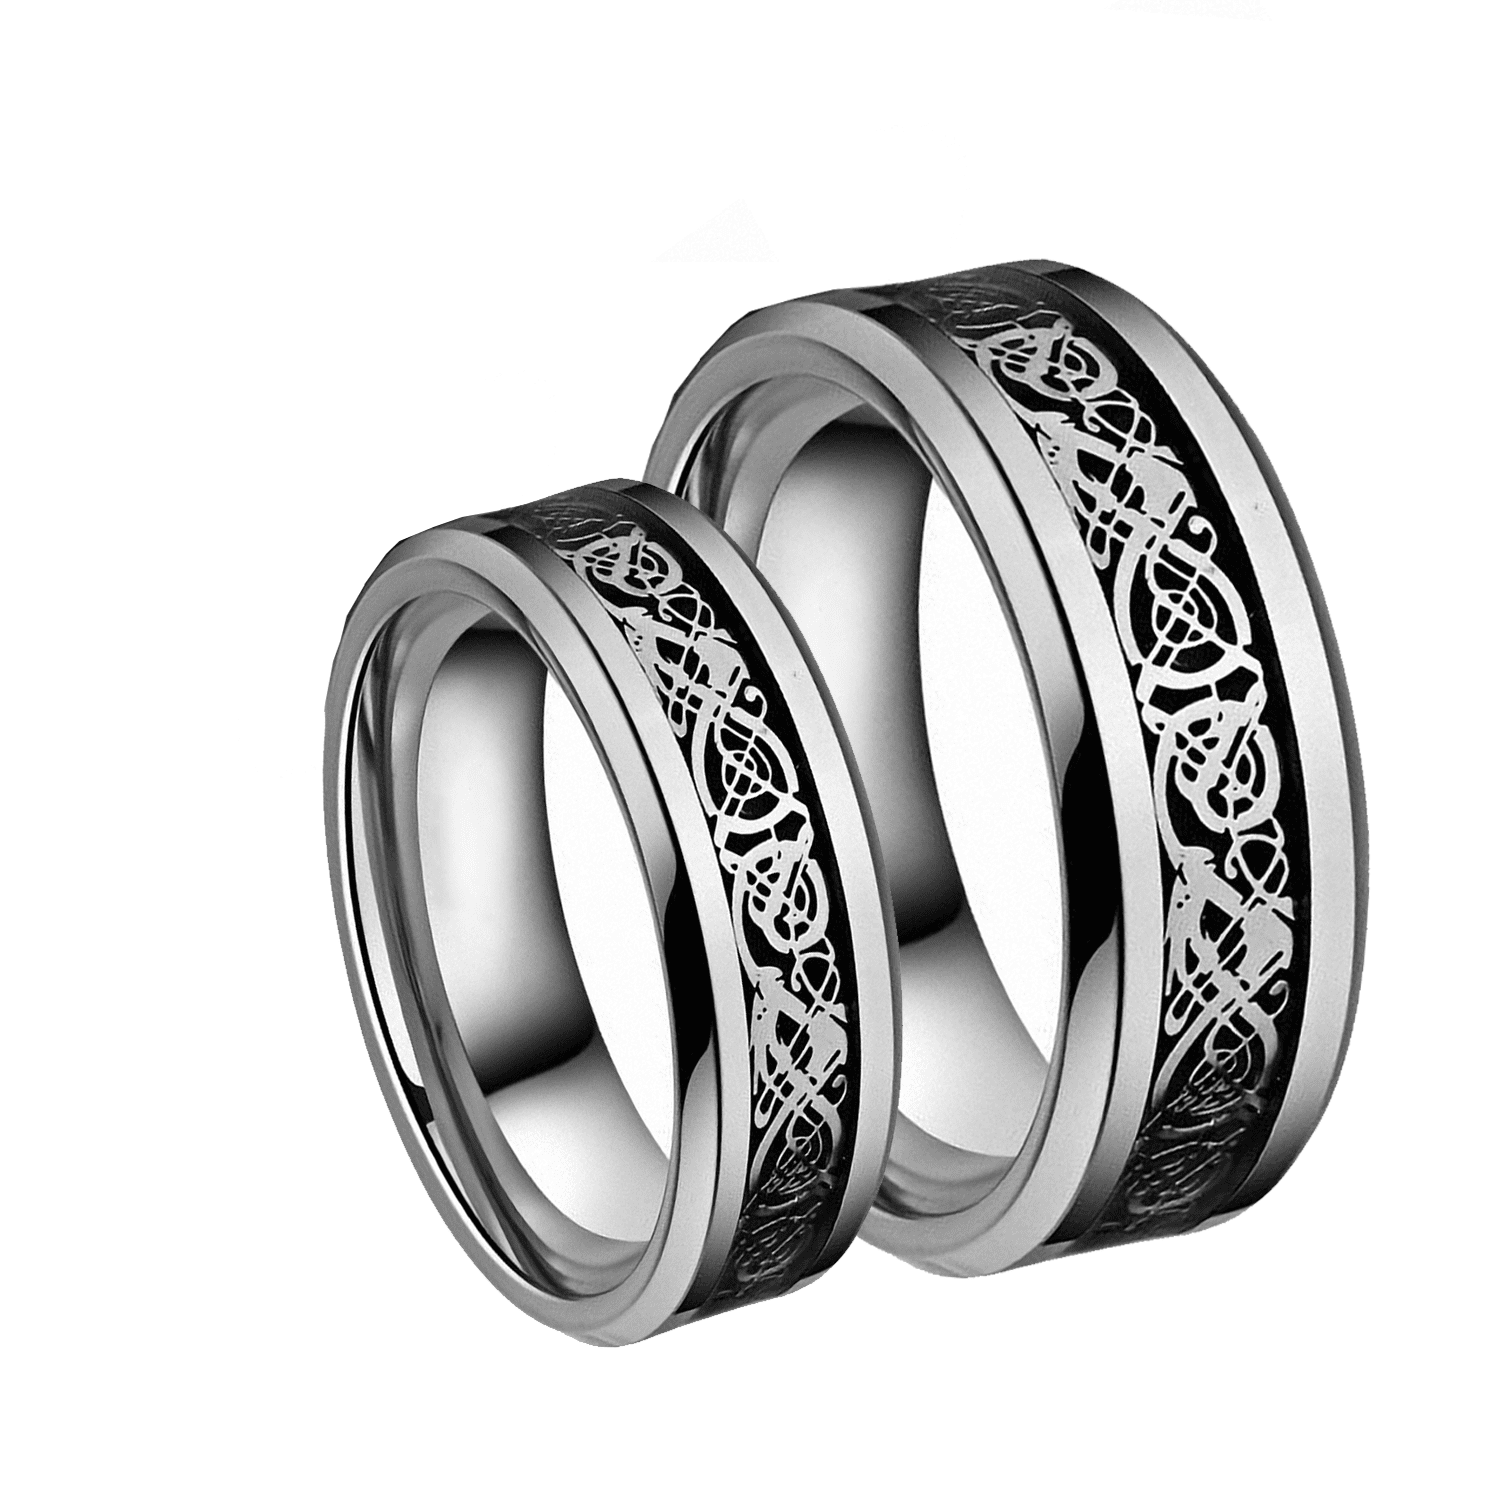 Ladies Size 6 Mens Size 7 His & Her's 8MM/6MM Dragon Design Tungsten Carbide Wedding Band Ring Set